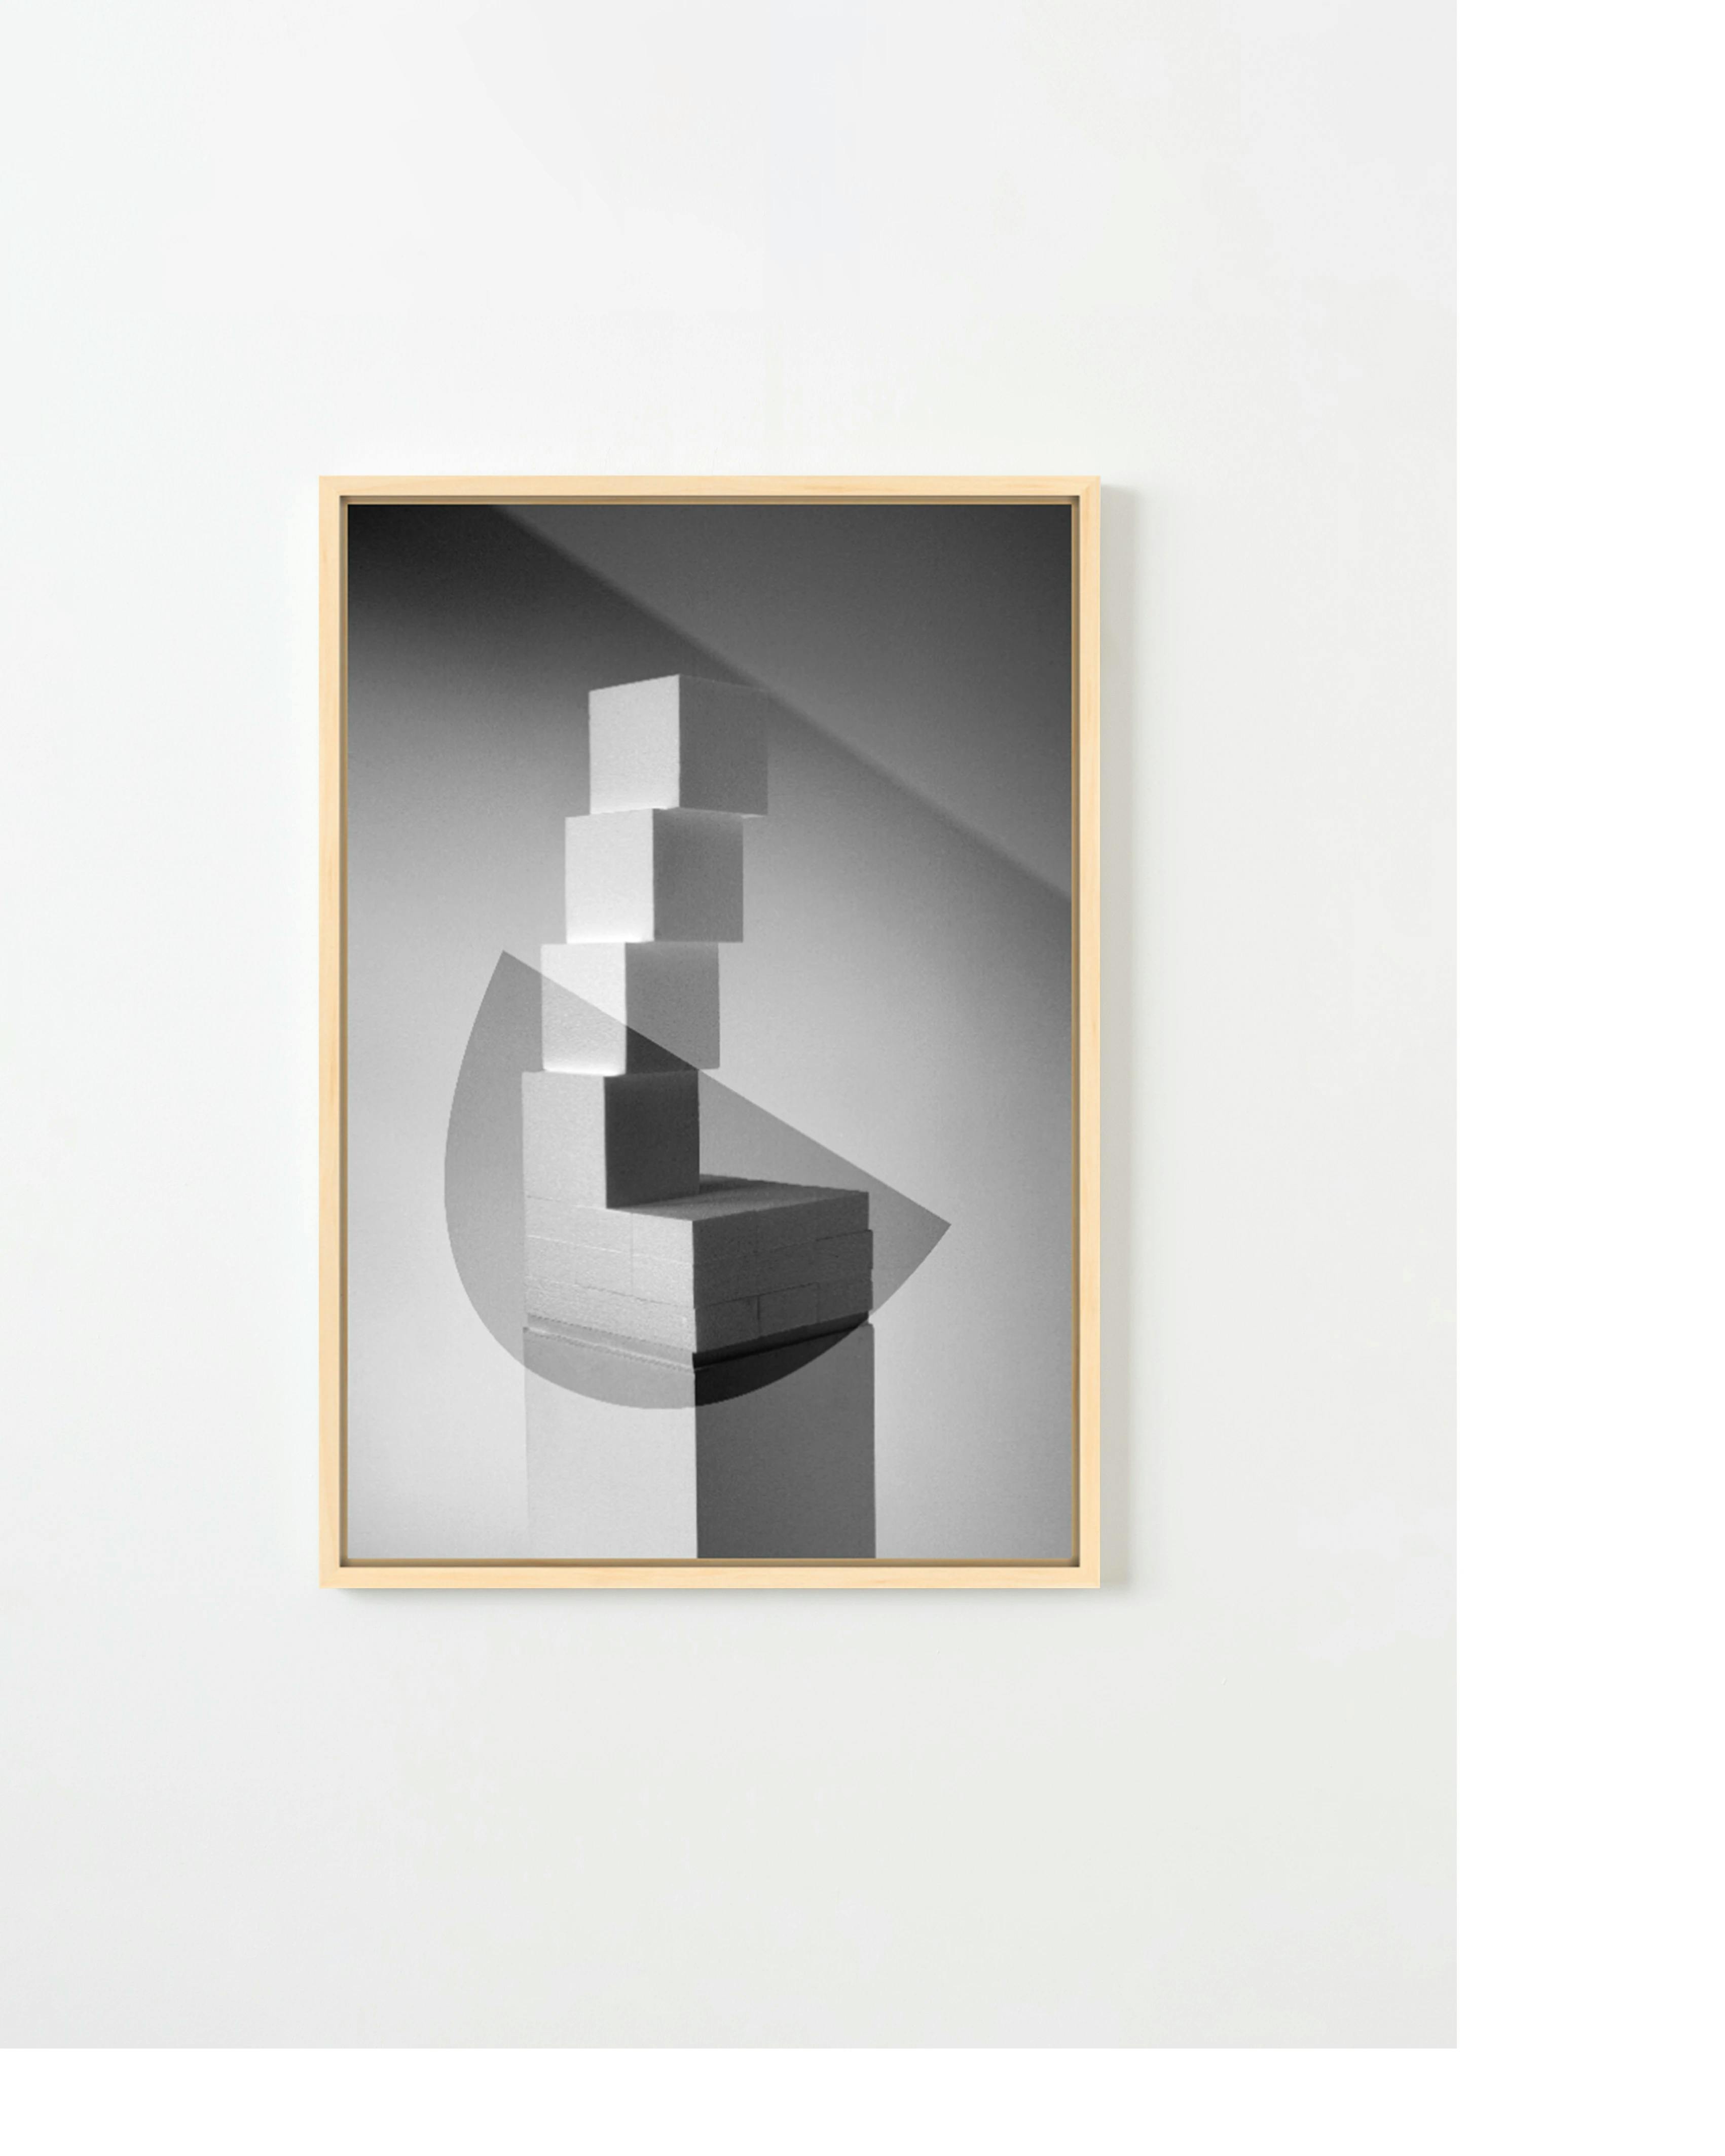 A framed, black and white print by artist Adam Ryder of a geometric tower.